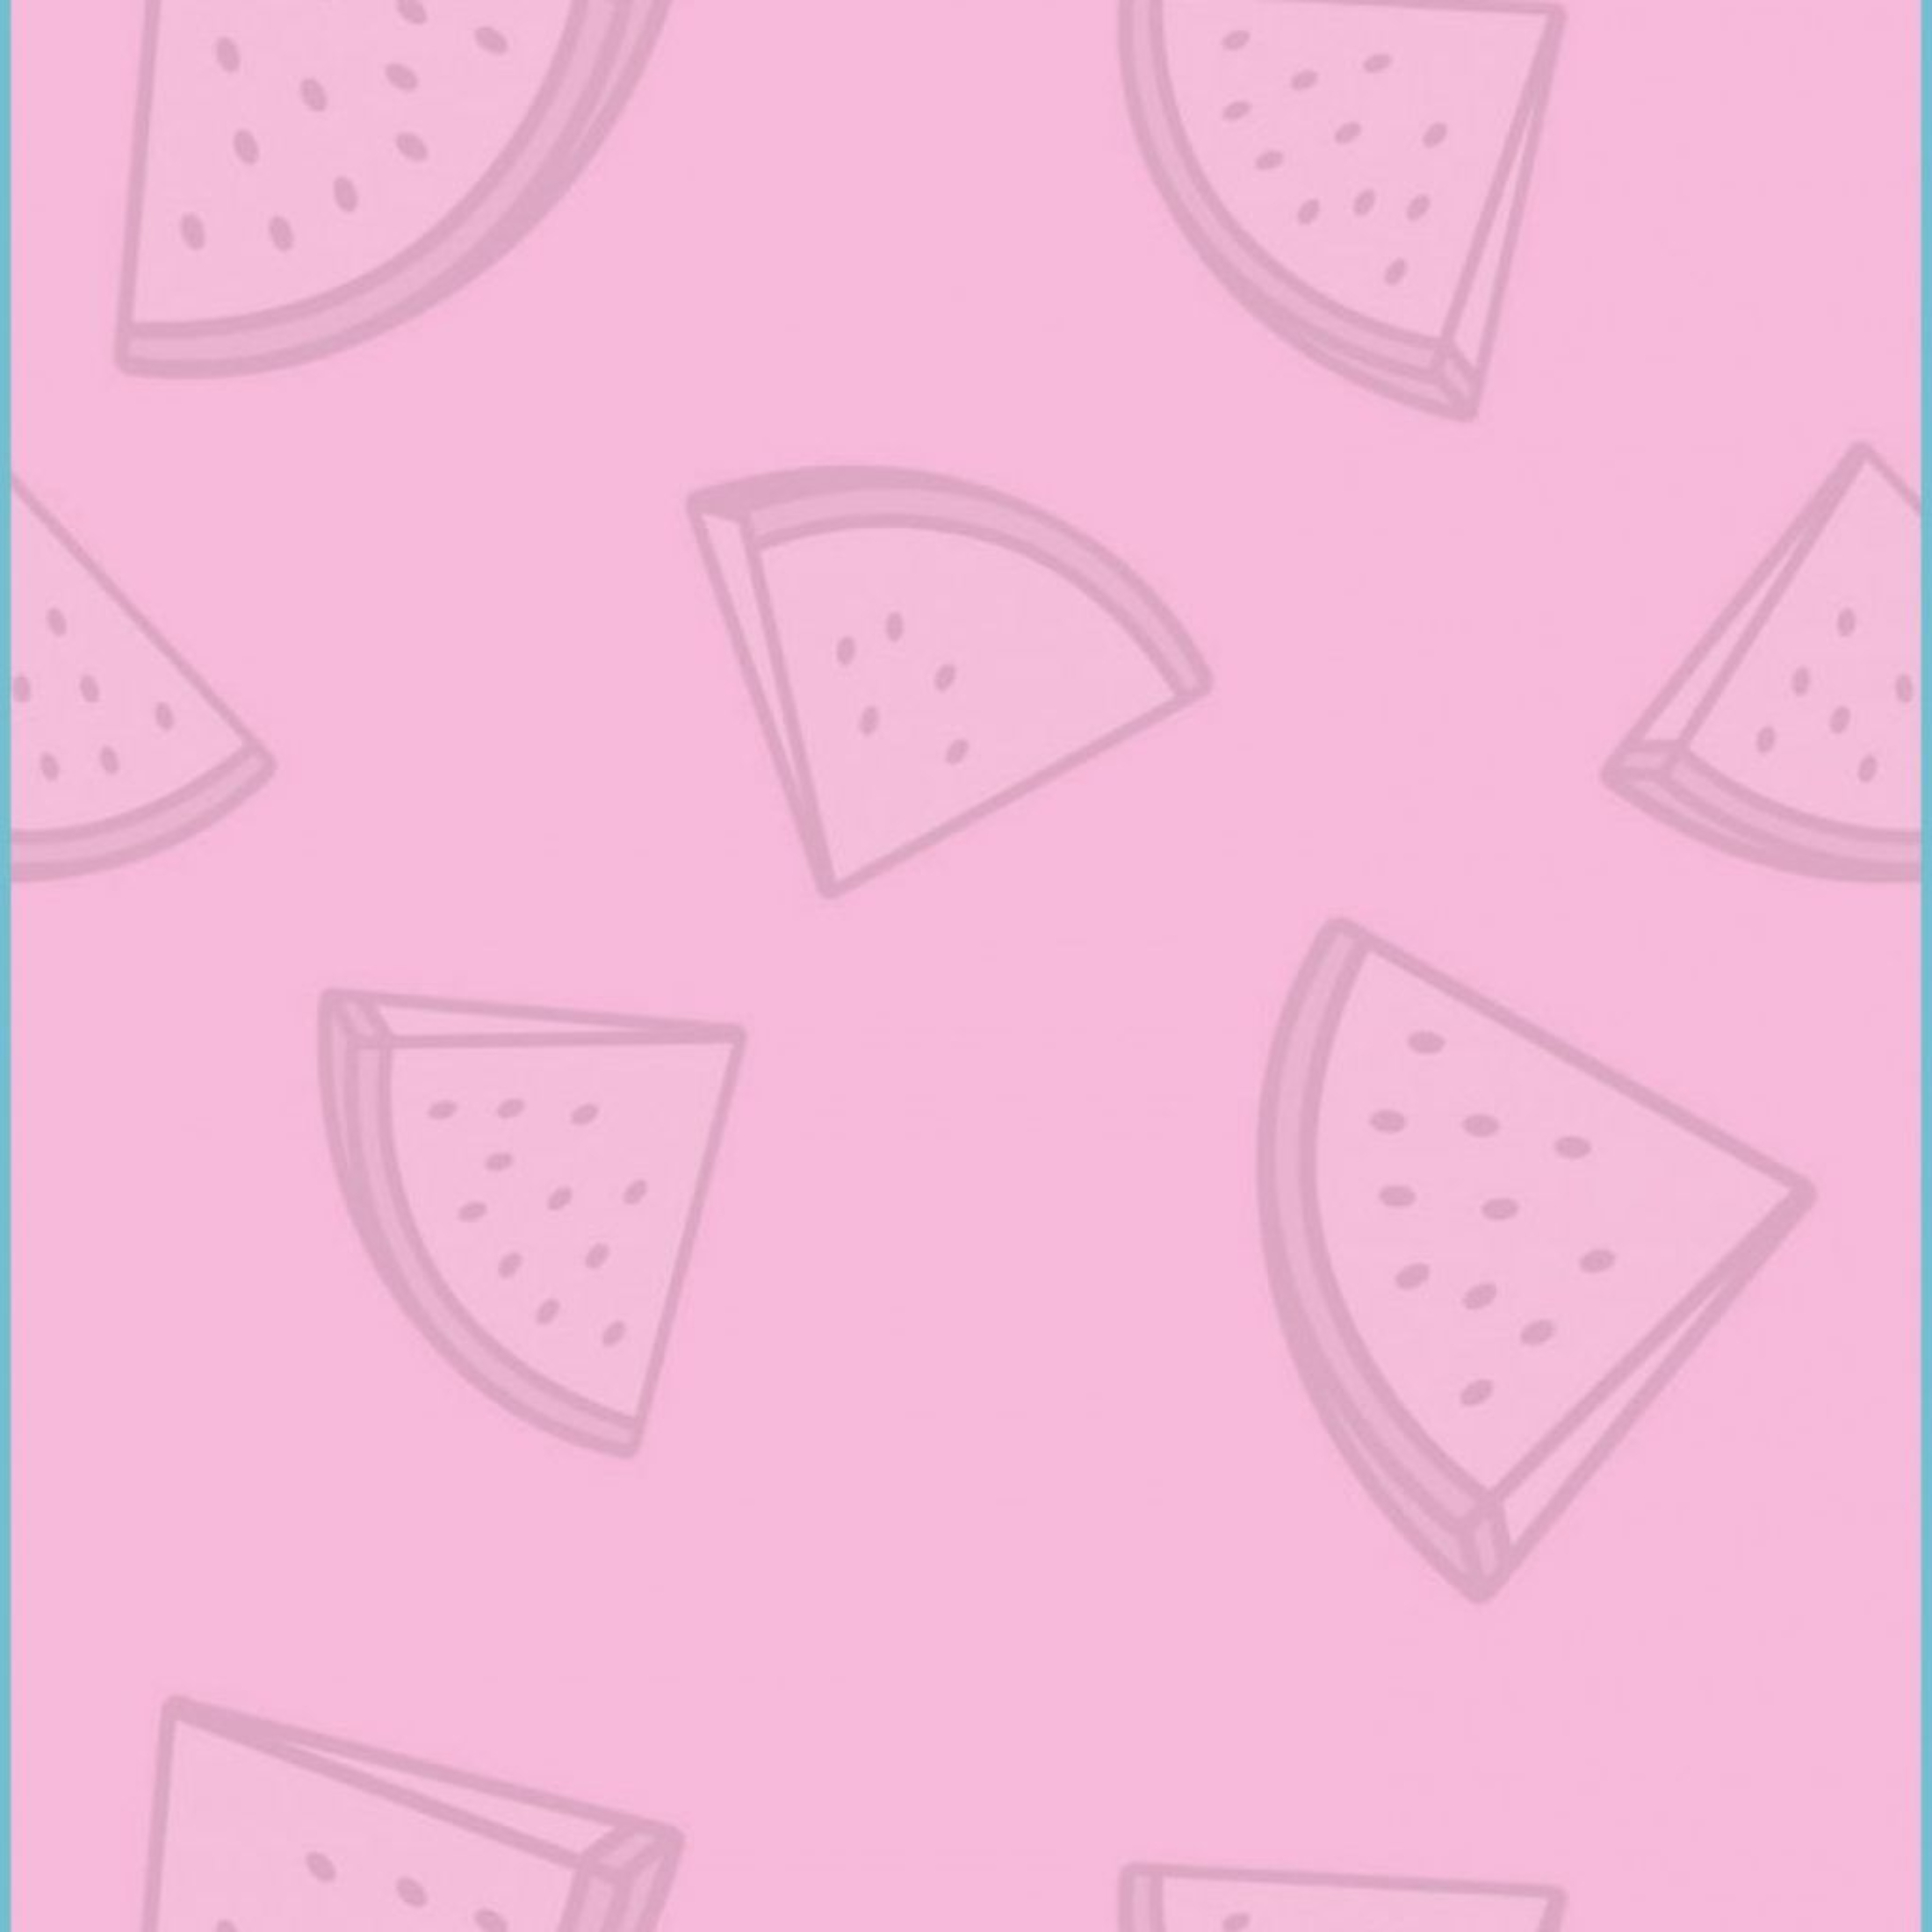 You are currently viewing Preppy aesthetic watermelon pieces wallpaper